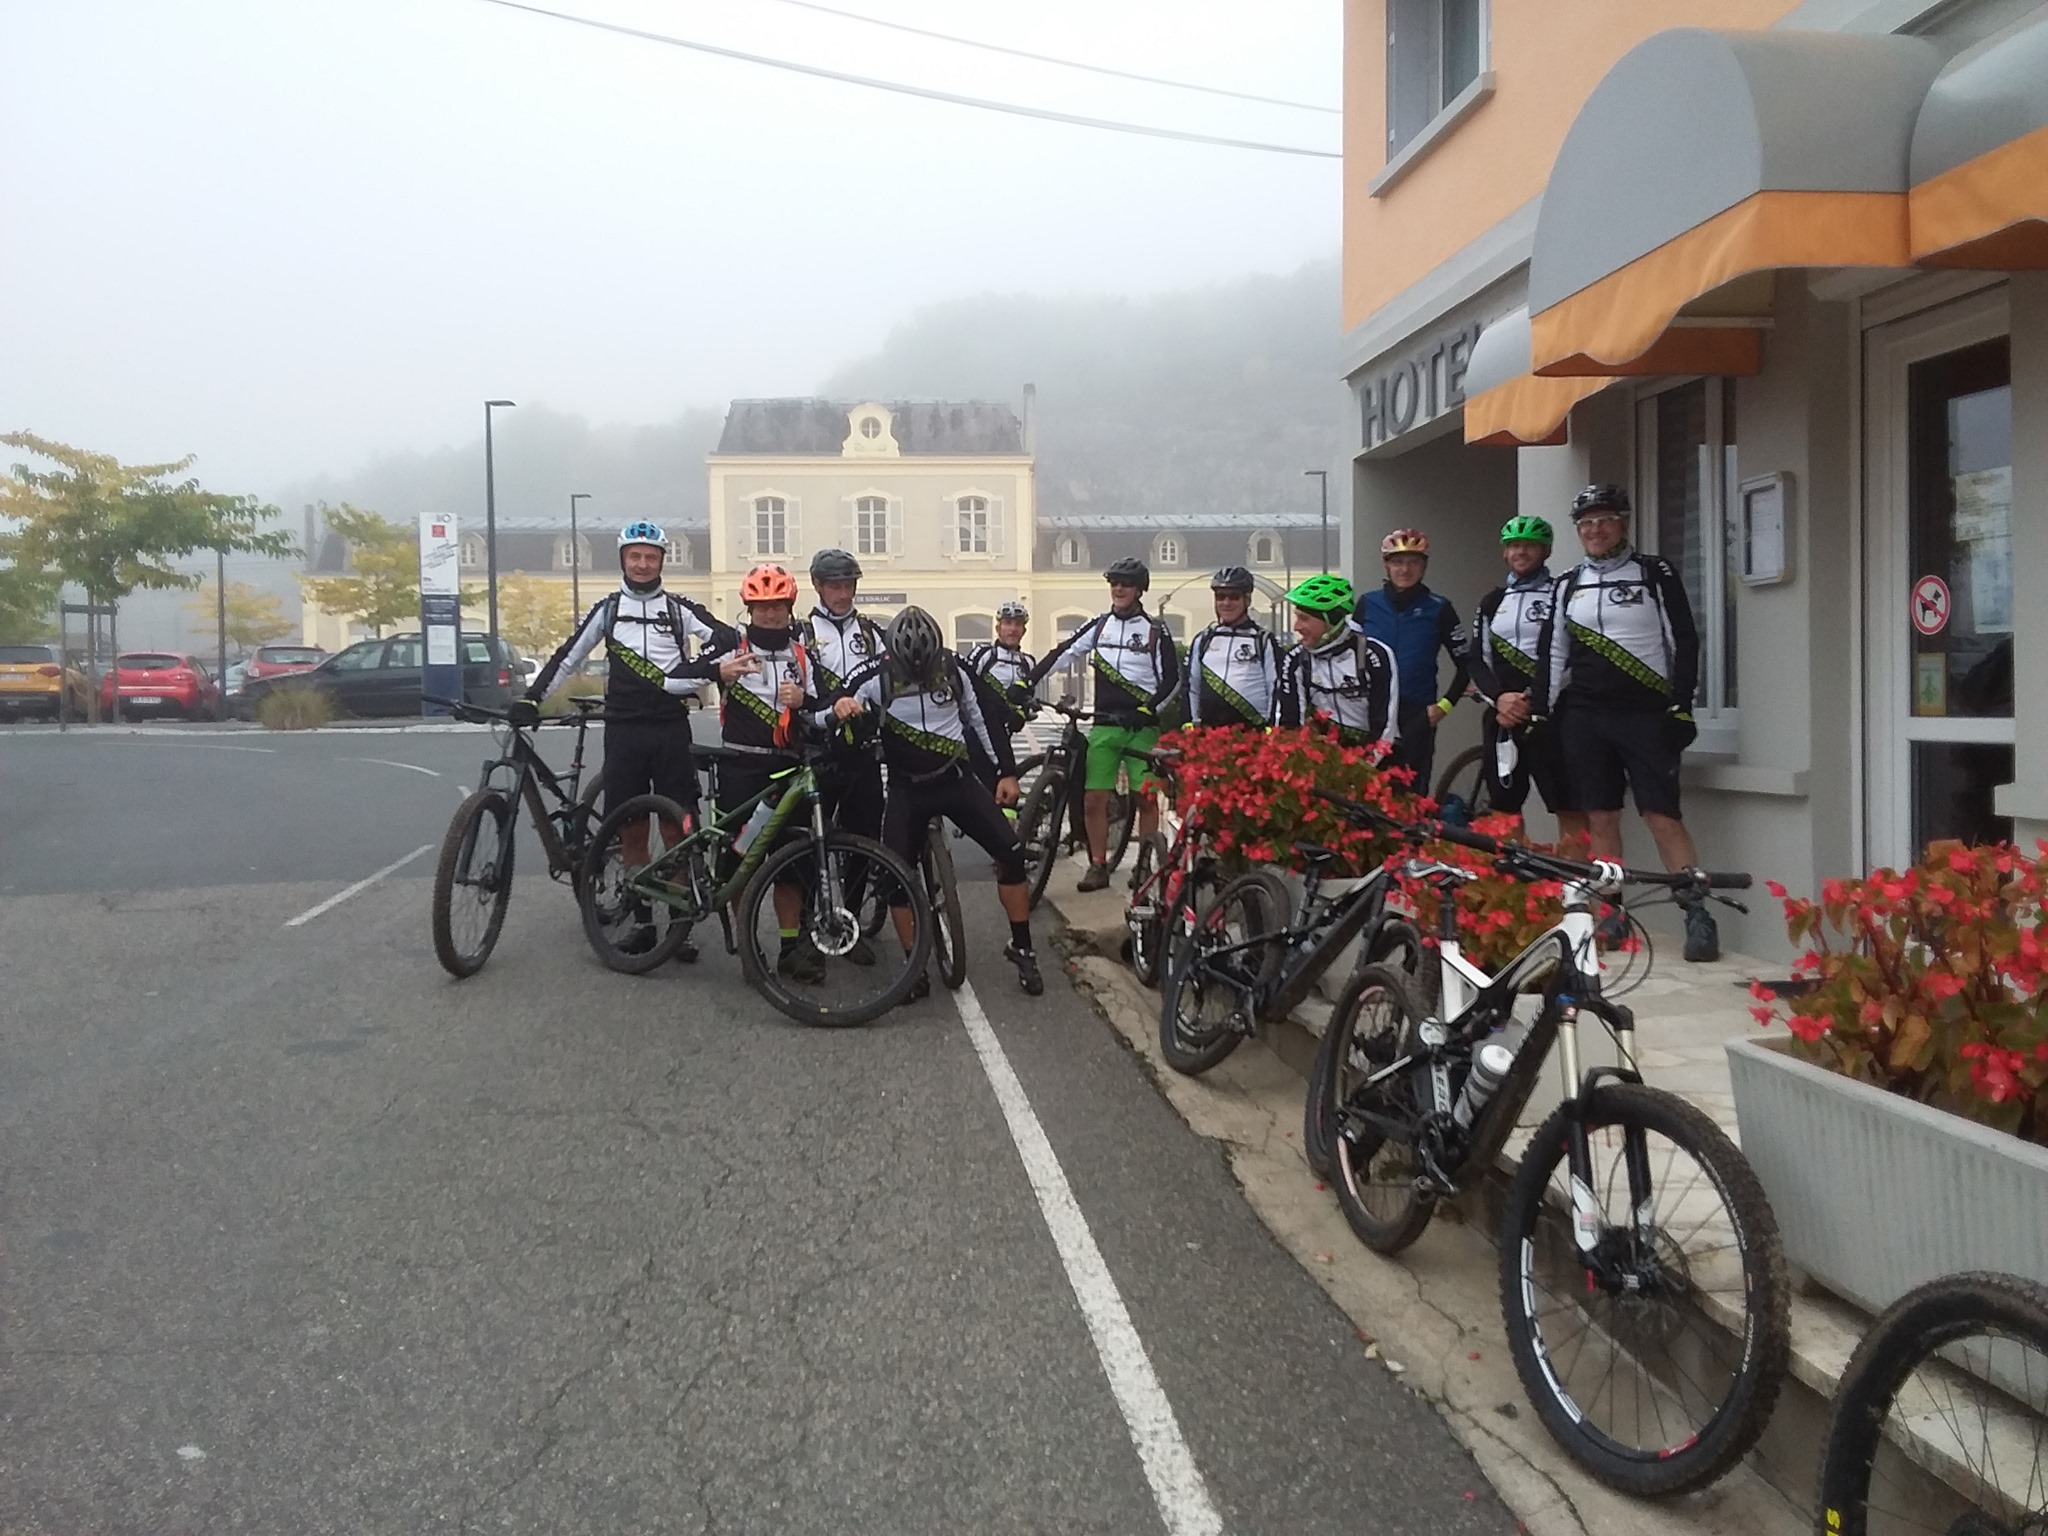 groupe cycliste hotel souillac